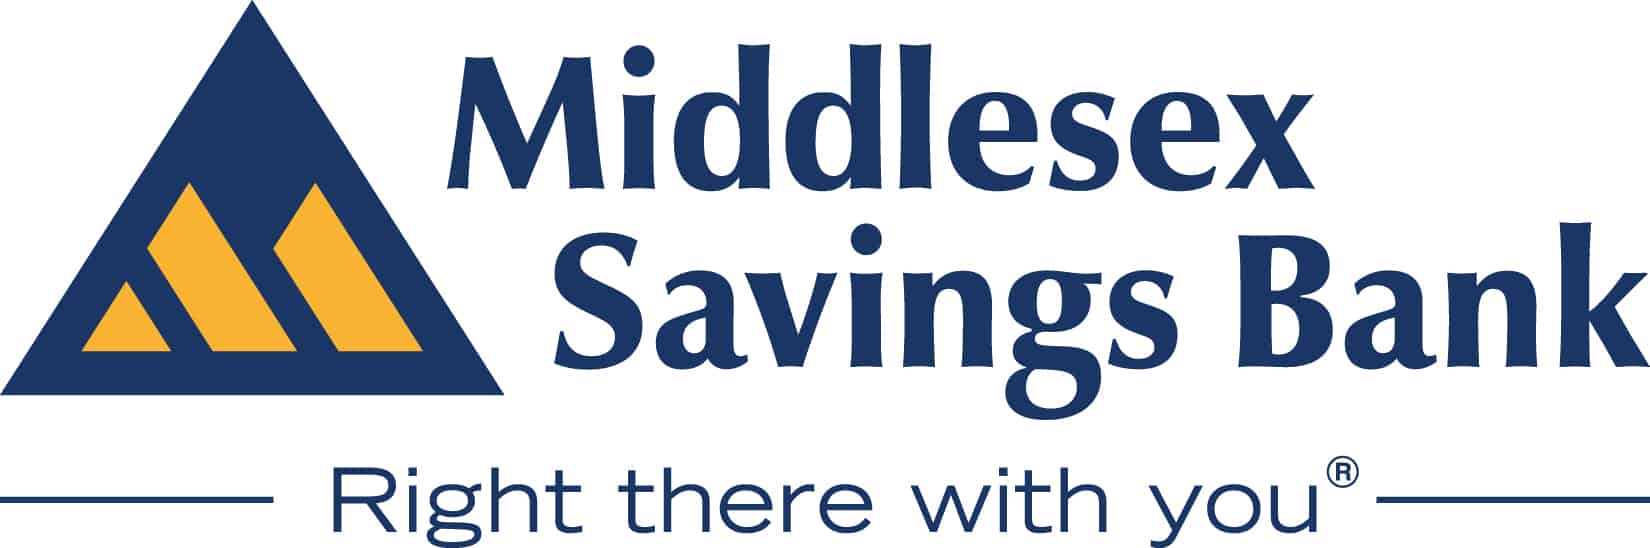 Middlesex Savings Bank Charitable Foundation